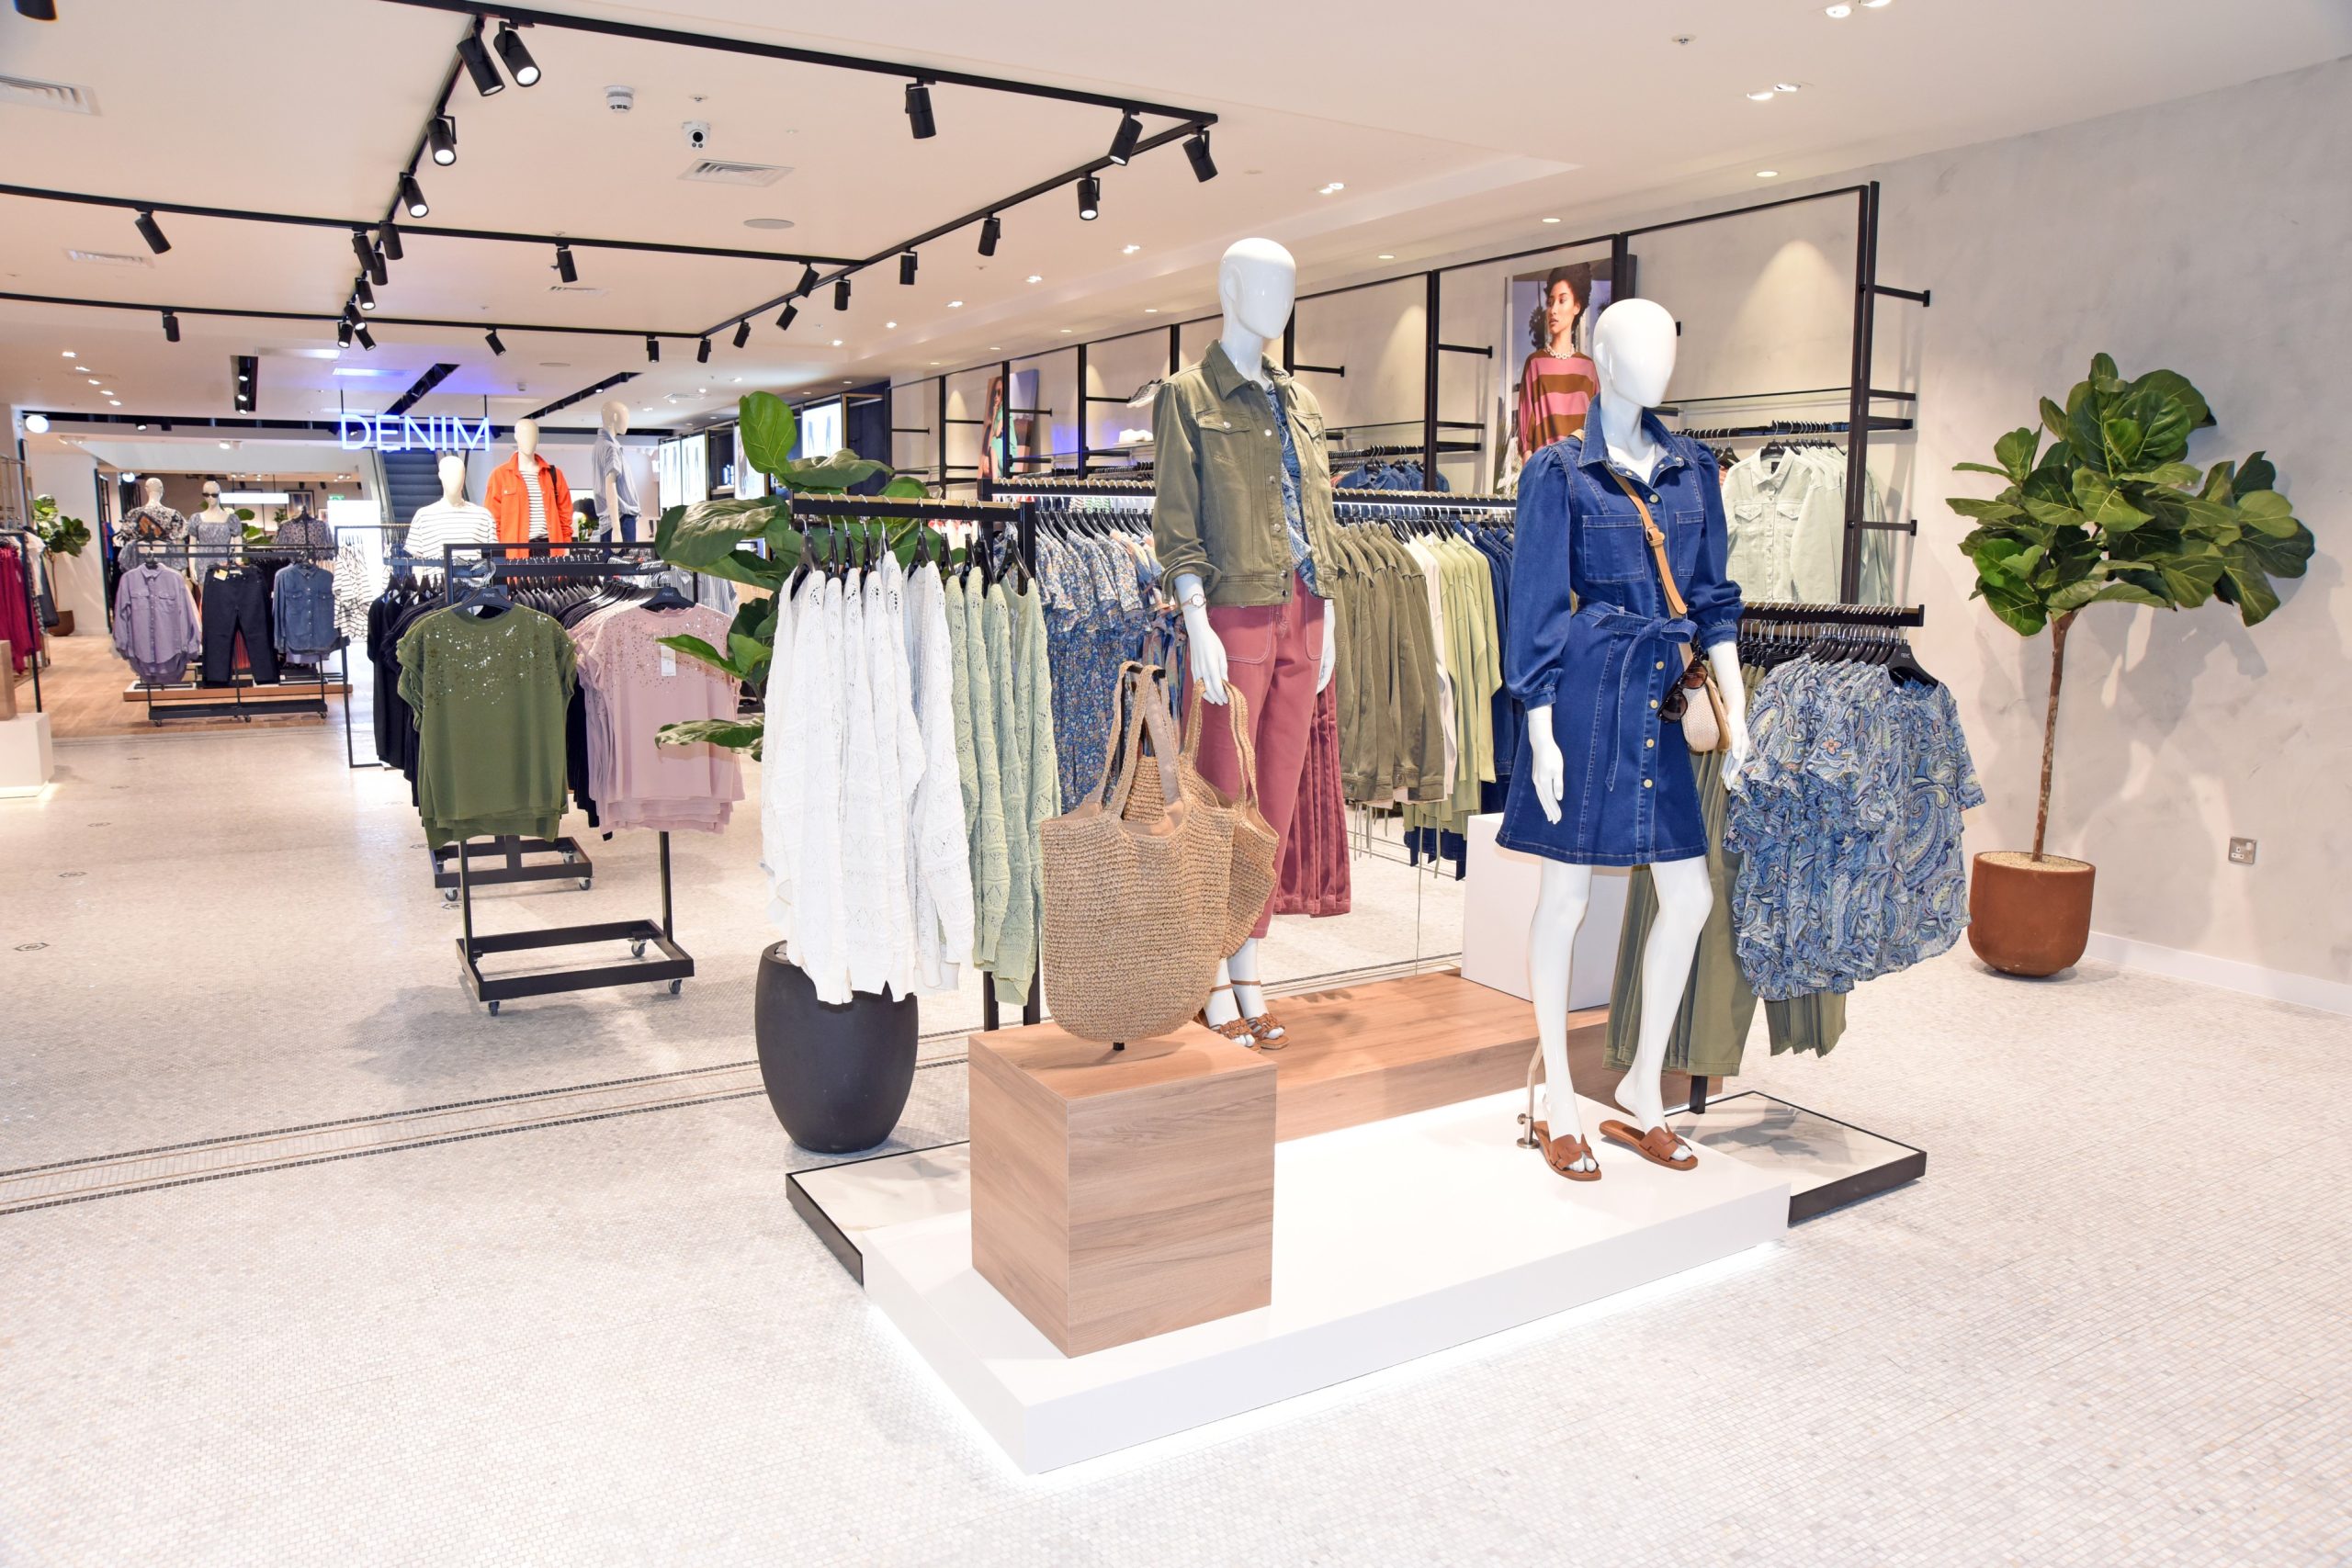 In pictures: Next opens first department store | LaptrinhX / News